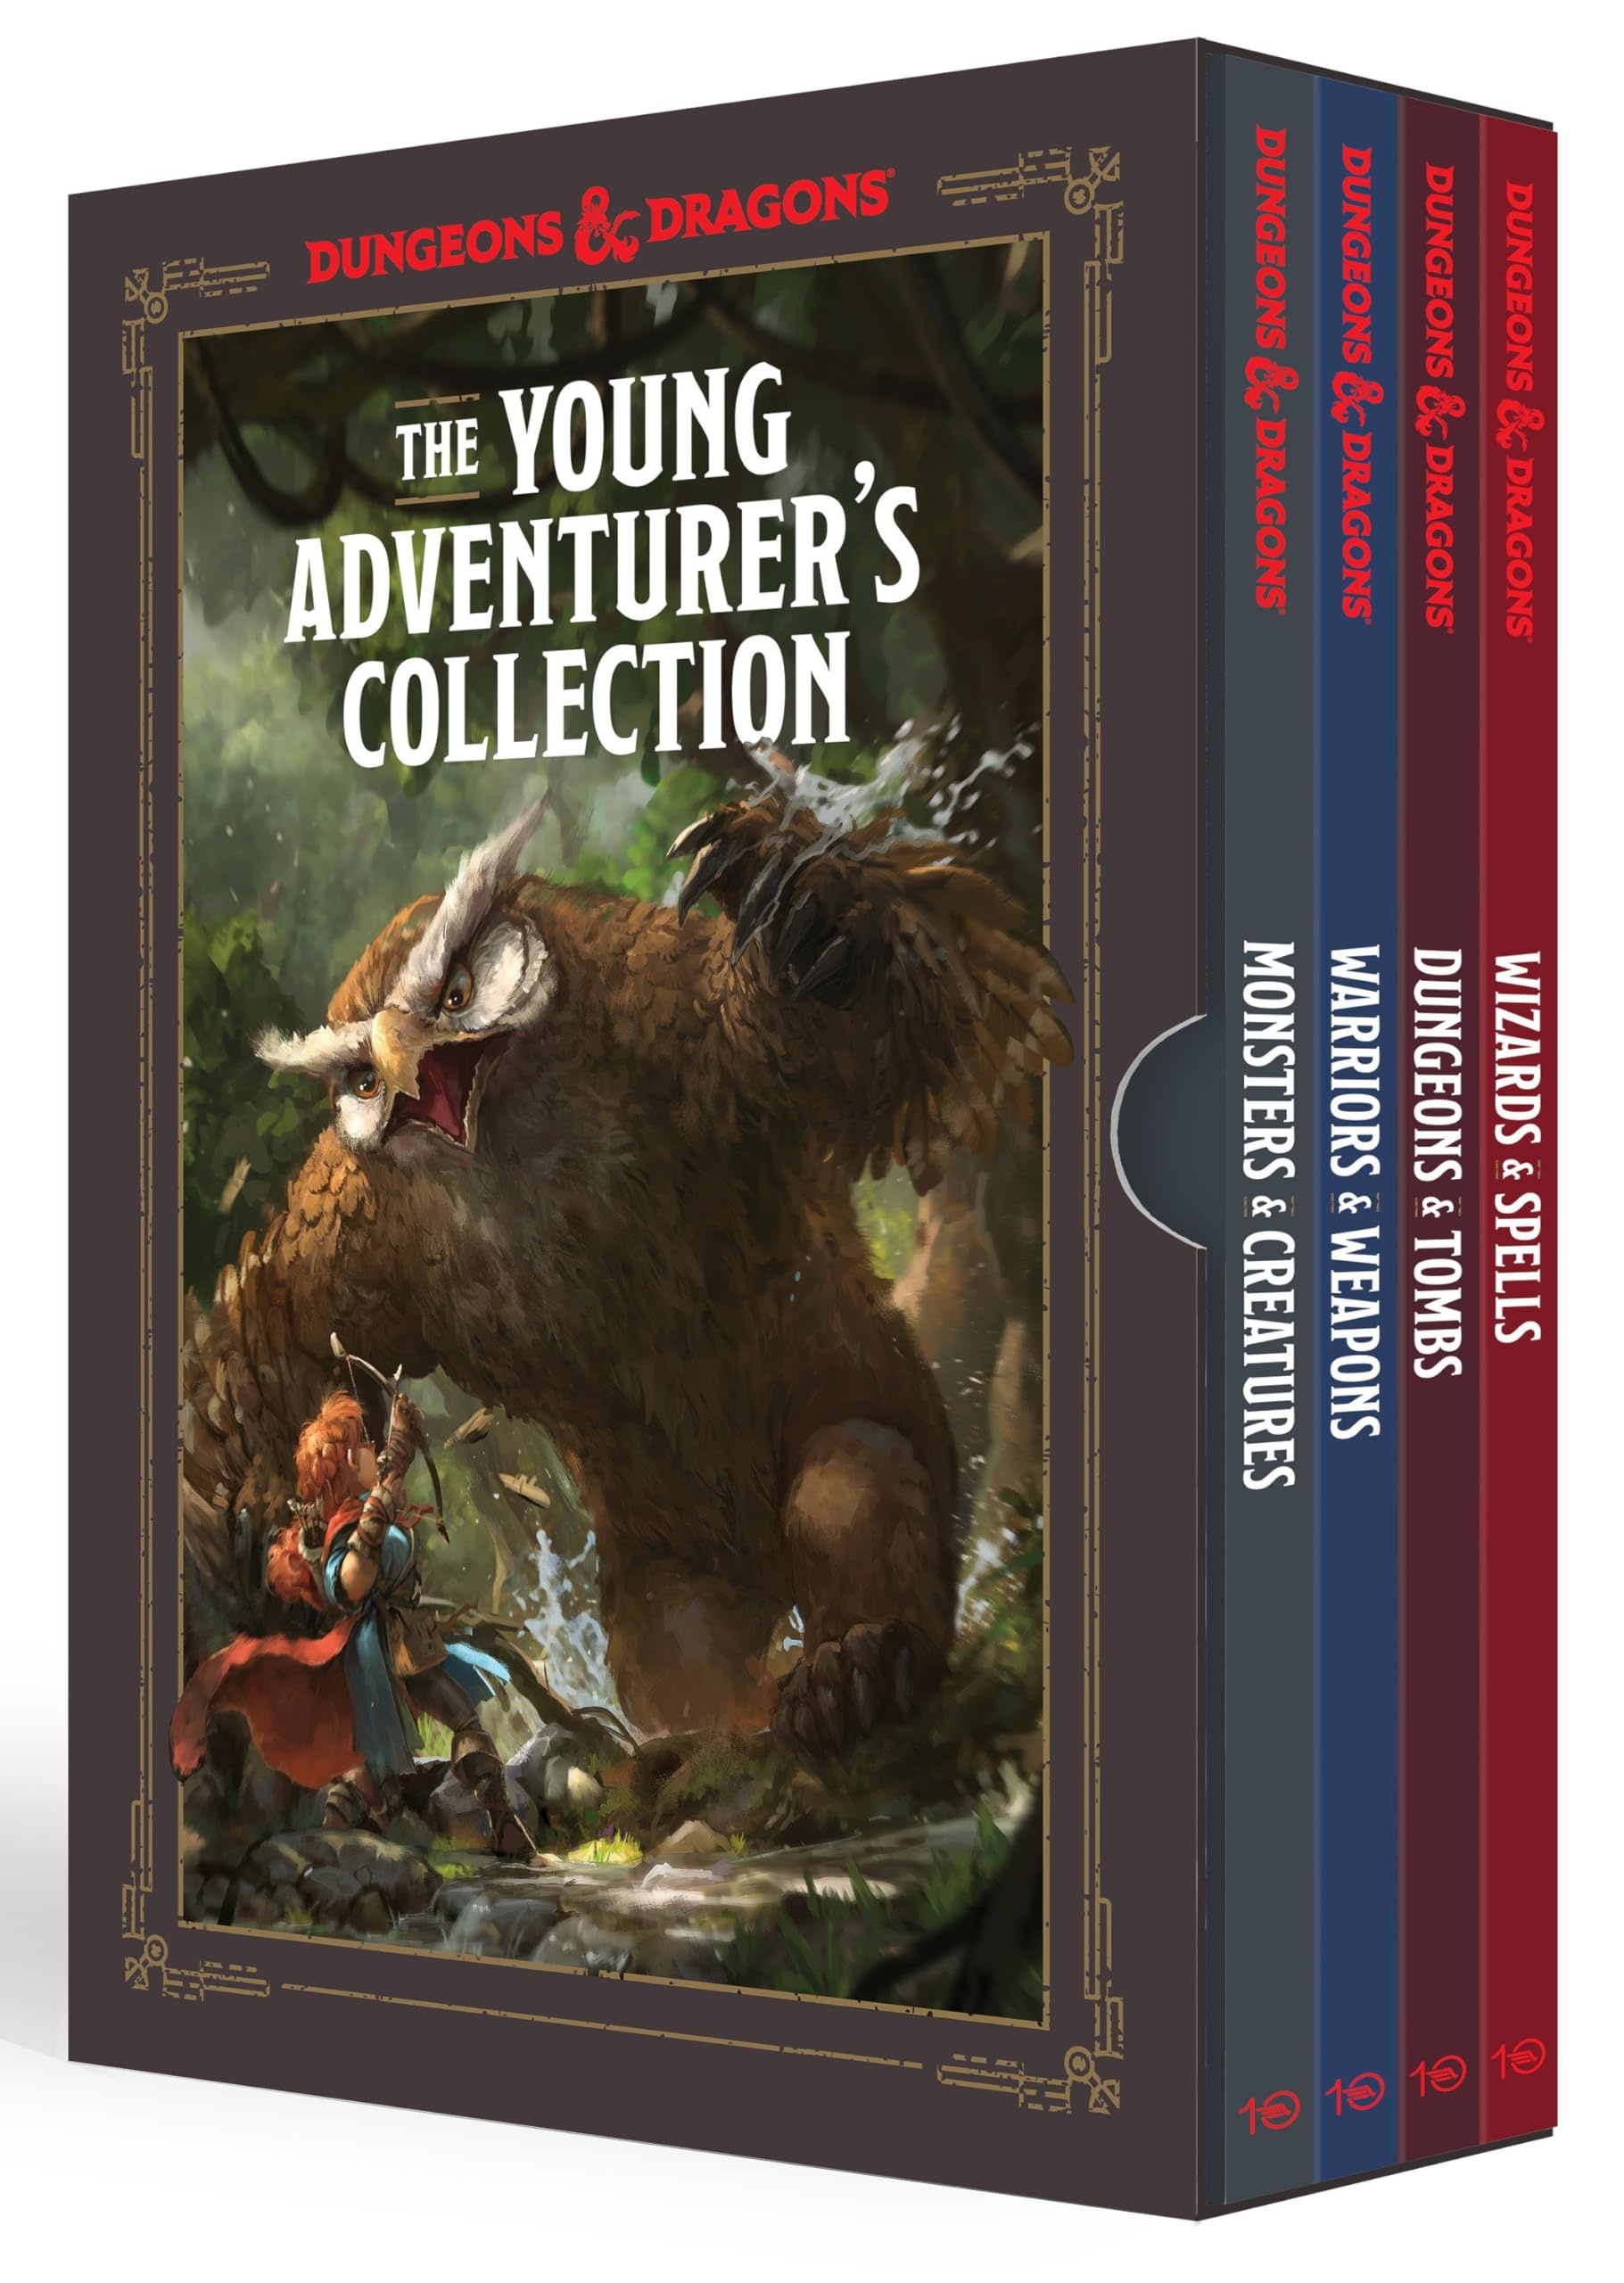 The Young Adventurer's Collection Box Set 1 [Dungeons & Dragons 4 Books]: Monsters & Creatures, Warriors & Weapons, Dungeons & Tombs, and Wizards & ... & Dragons Young Adventurer's Guides)